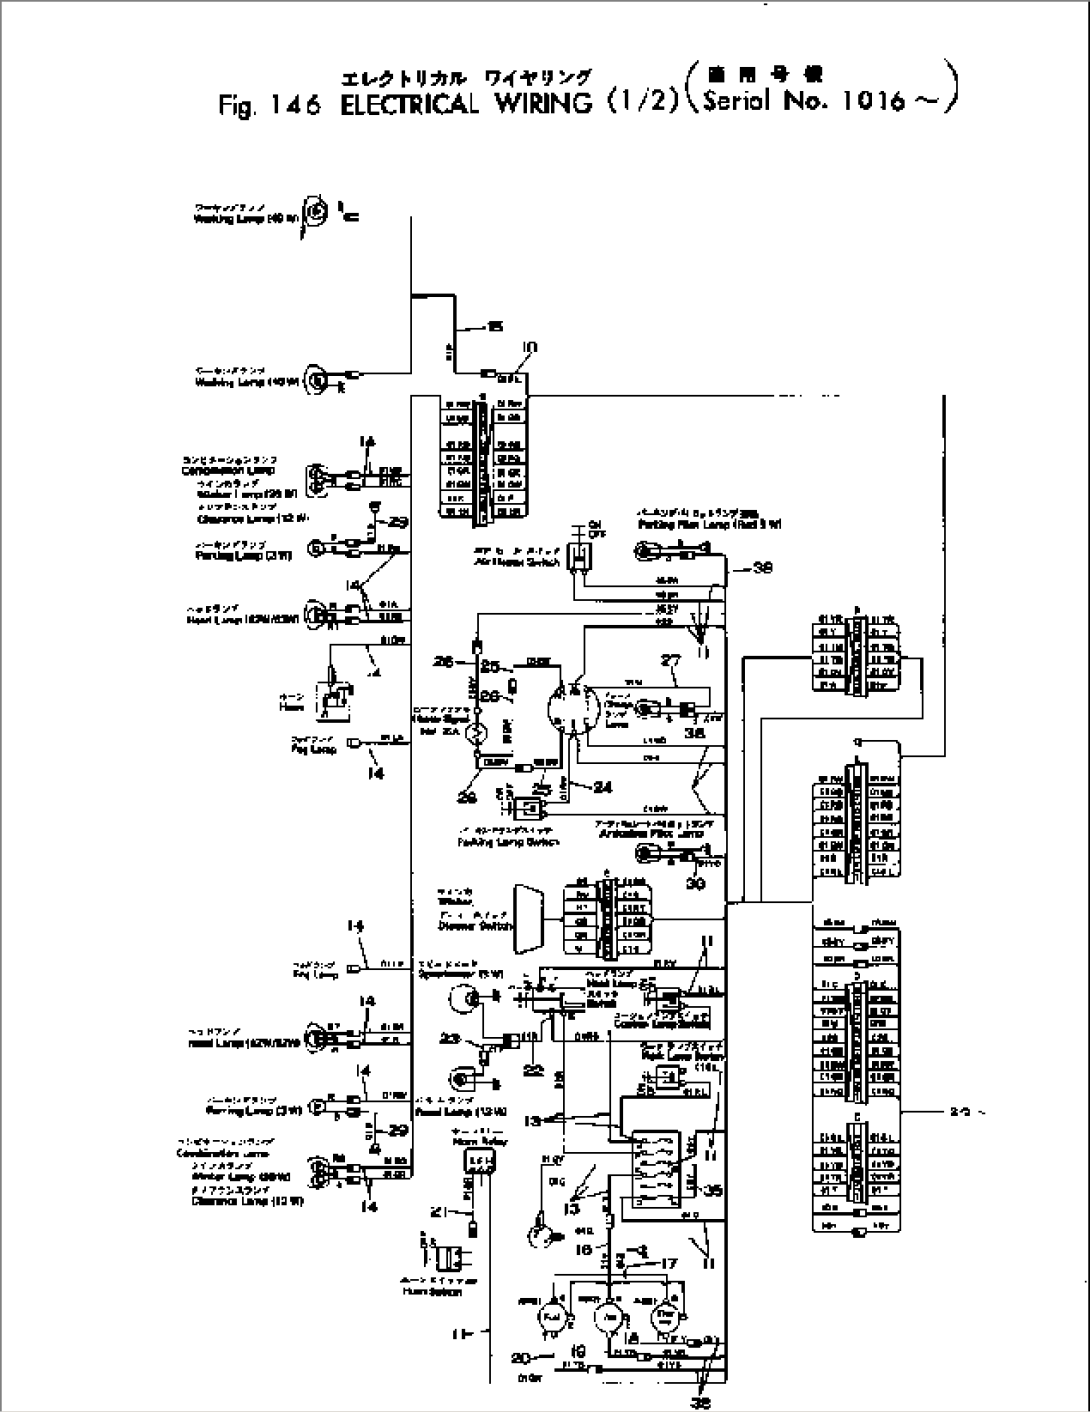 ELECTRICAL WIRING (1/2)(#1016-)